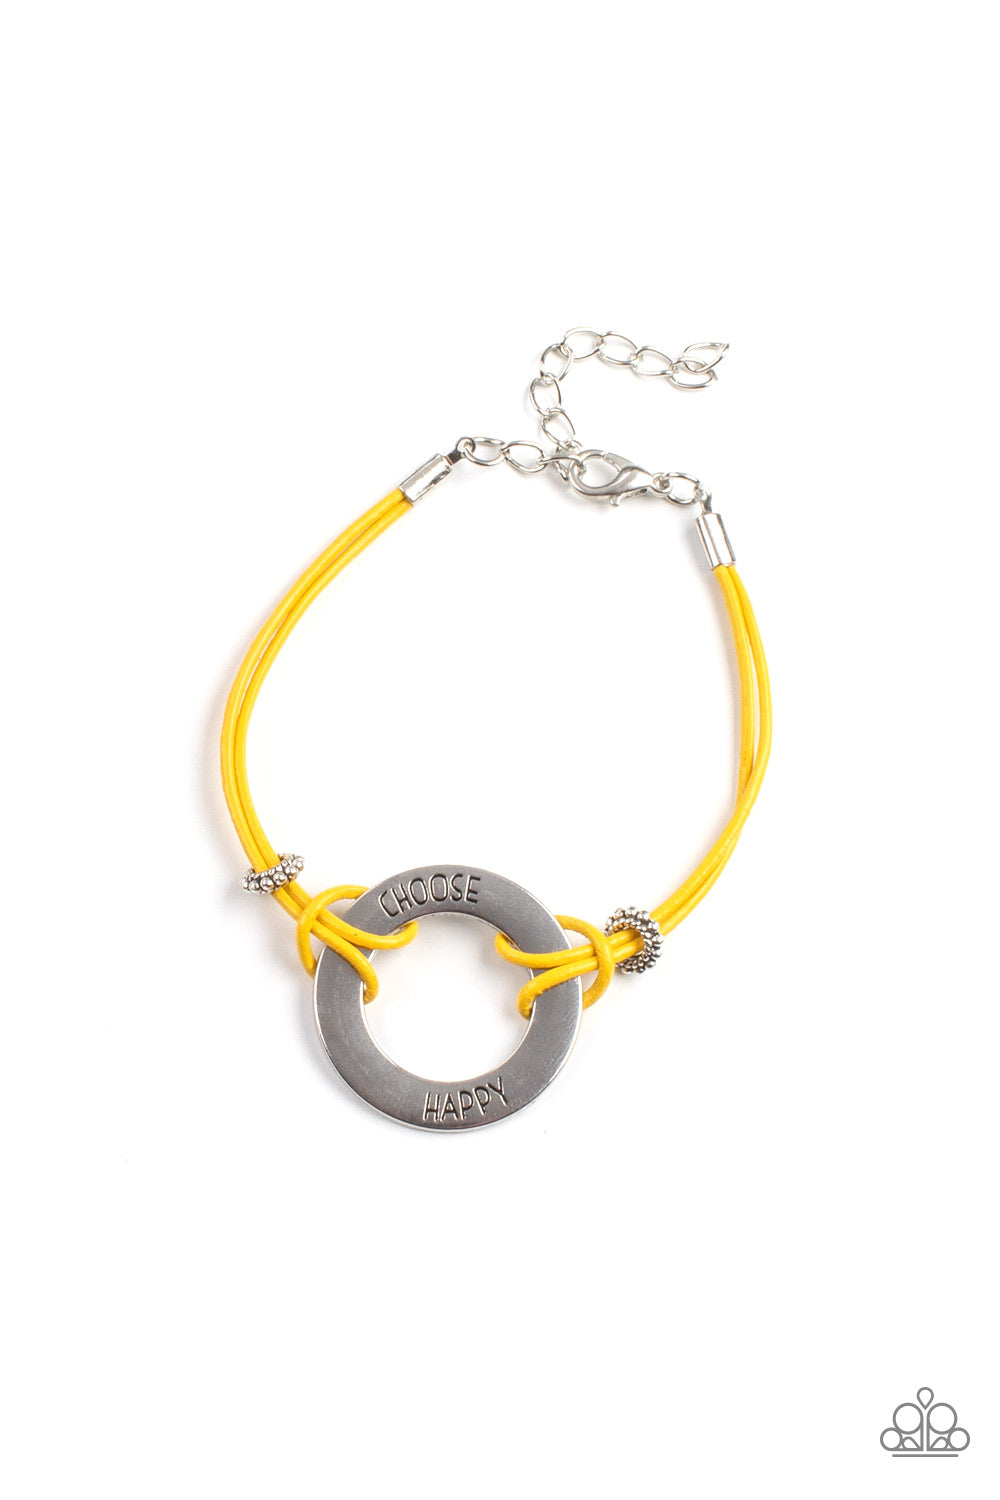 Choose Happy - Yellow Leather Bracelet - Paparazzi Accessories - Bejeweled Jewelry by Kristie - Infused with studded silver beads, yellow leathery cords knot around a silver ring stamped in the phrase, "Choose Happy," creating a motivational centerpiece around the wrist. Features an adjustable clasp closure fashion bracelet.